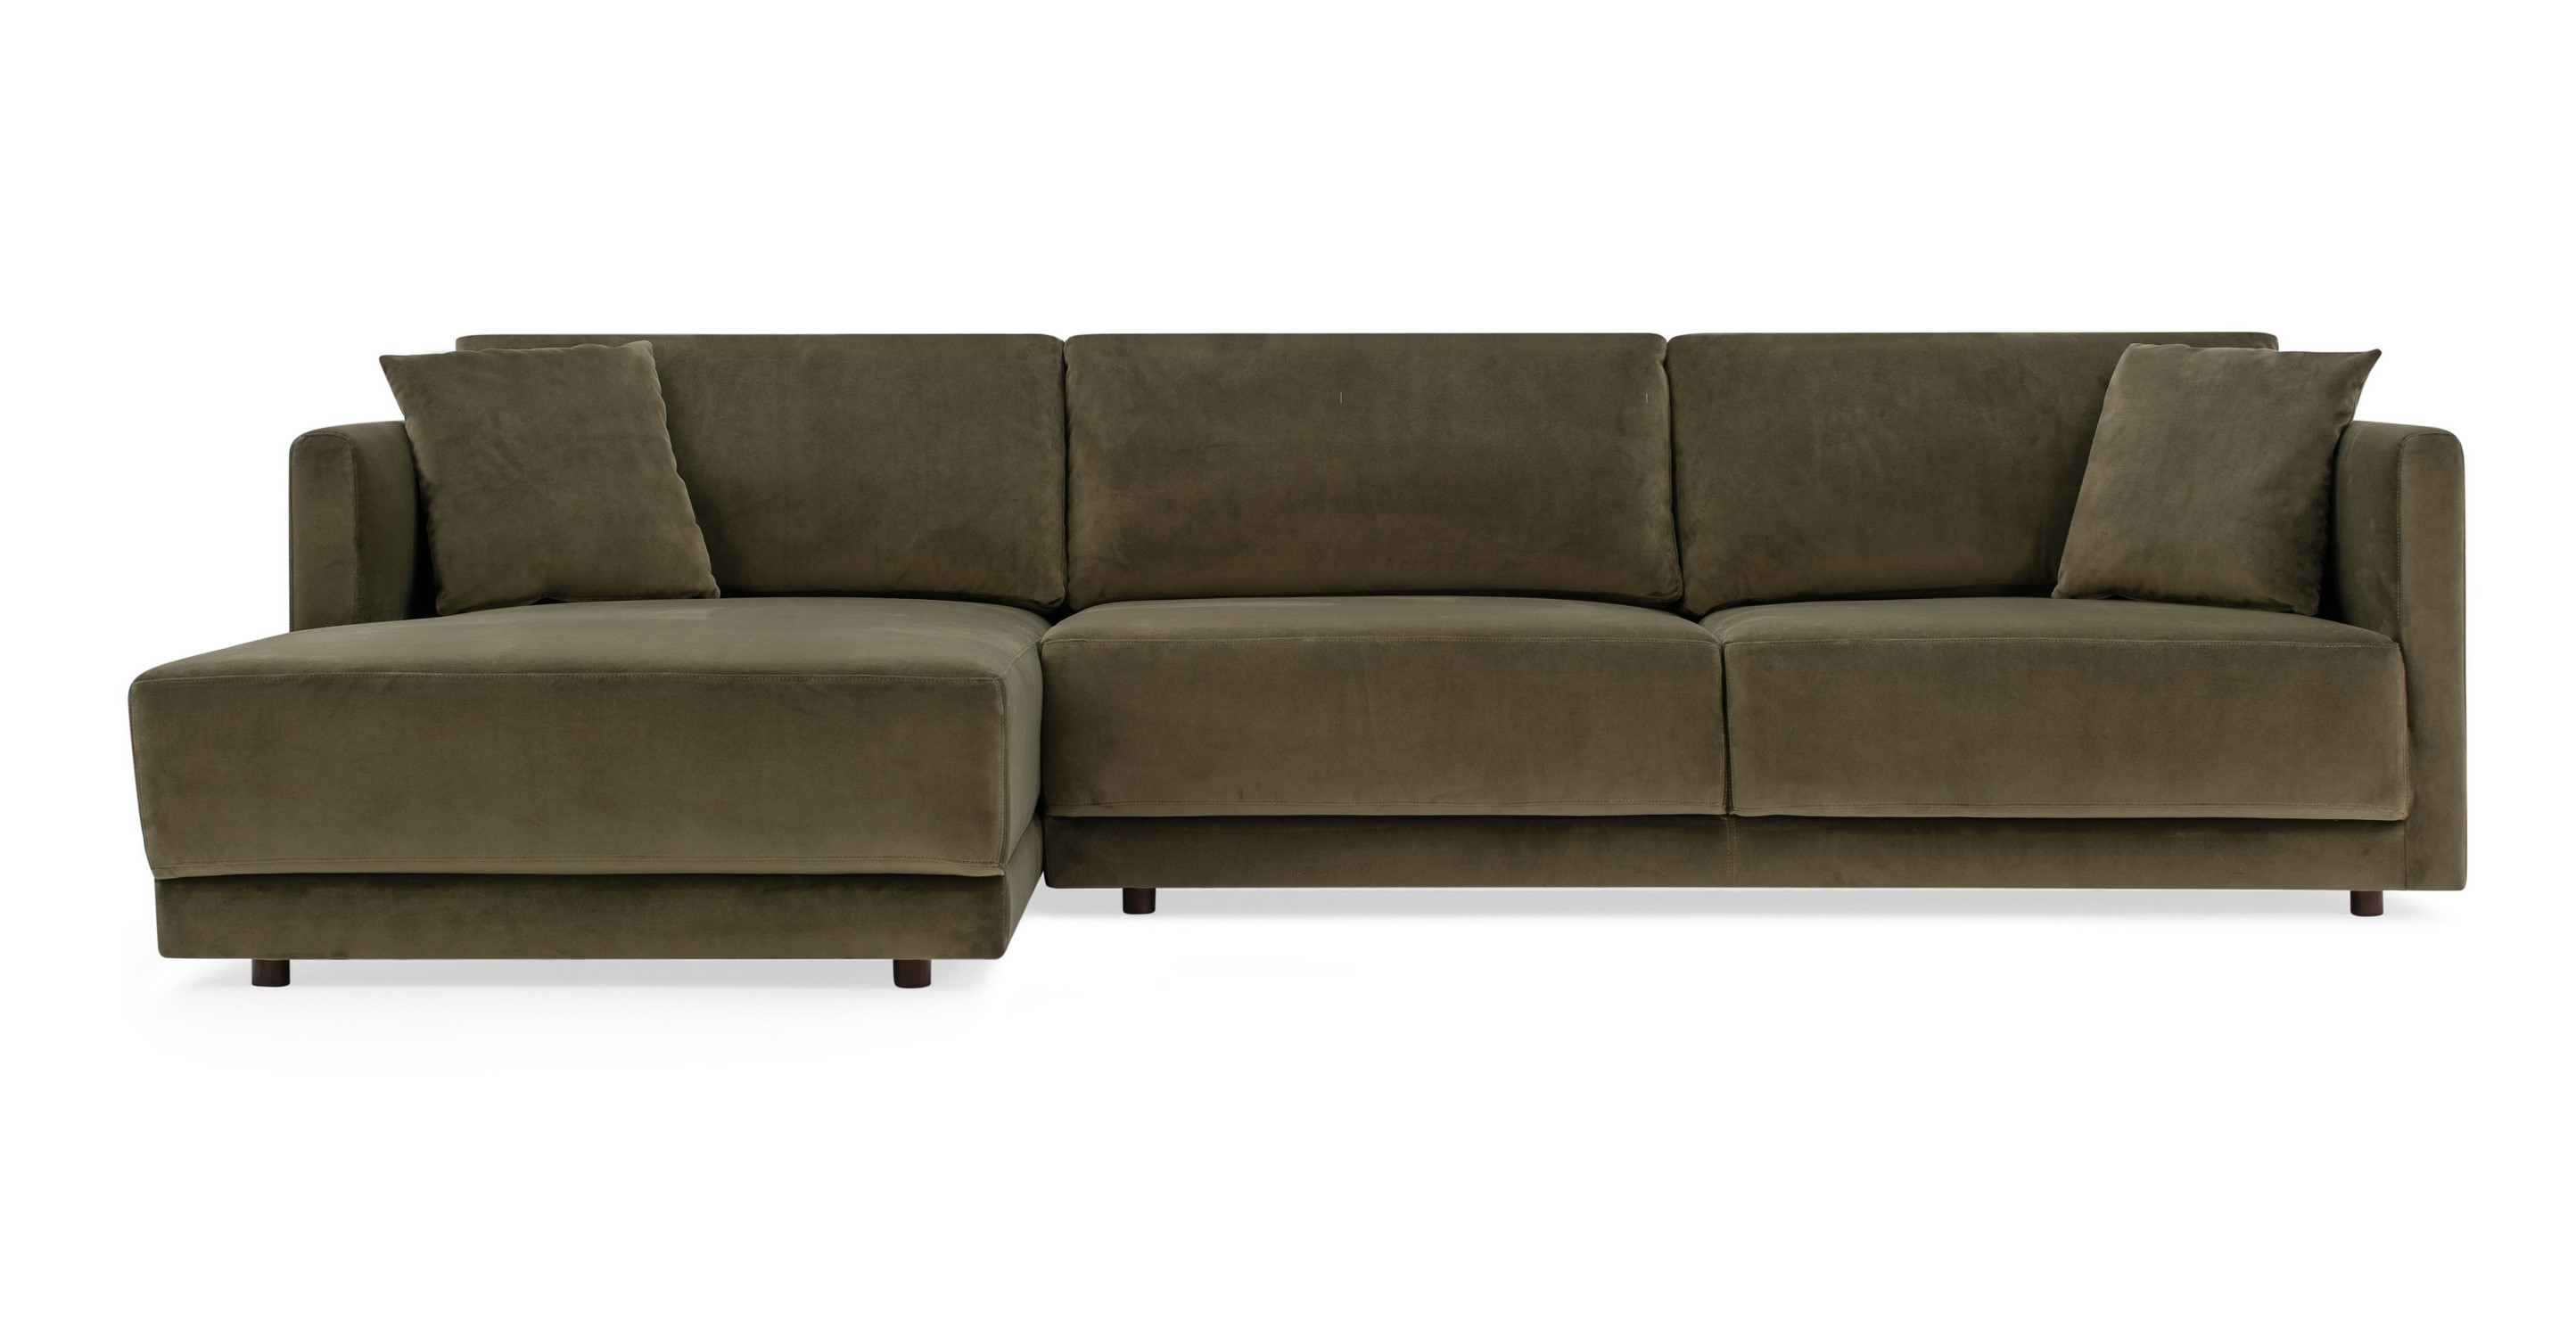 Sage Domus left sectional is a floor sectional with a chaise on the left (when facing the sectional) and a sofa option on the right. This sofa has removable back cushions, low profile arms, and is 100% upholstered. The sofa is floor based and 100% upholstered. This item can be used alone or added as part of the Domus series. The style is modern and minimalist.